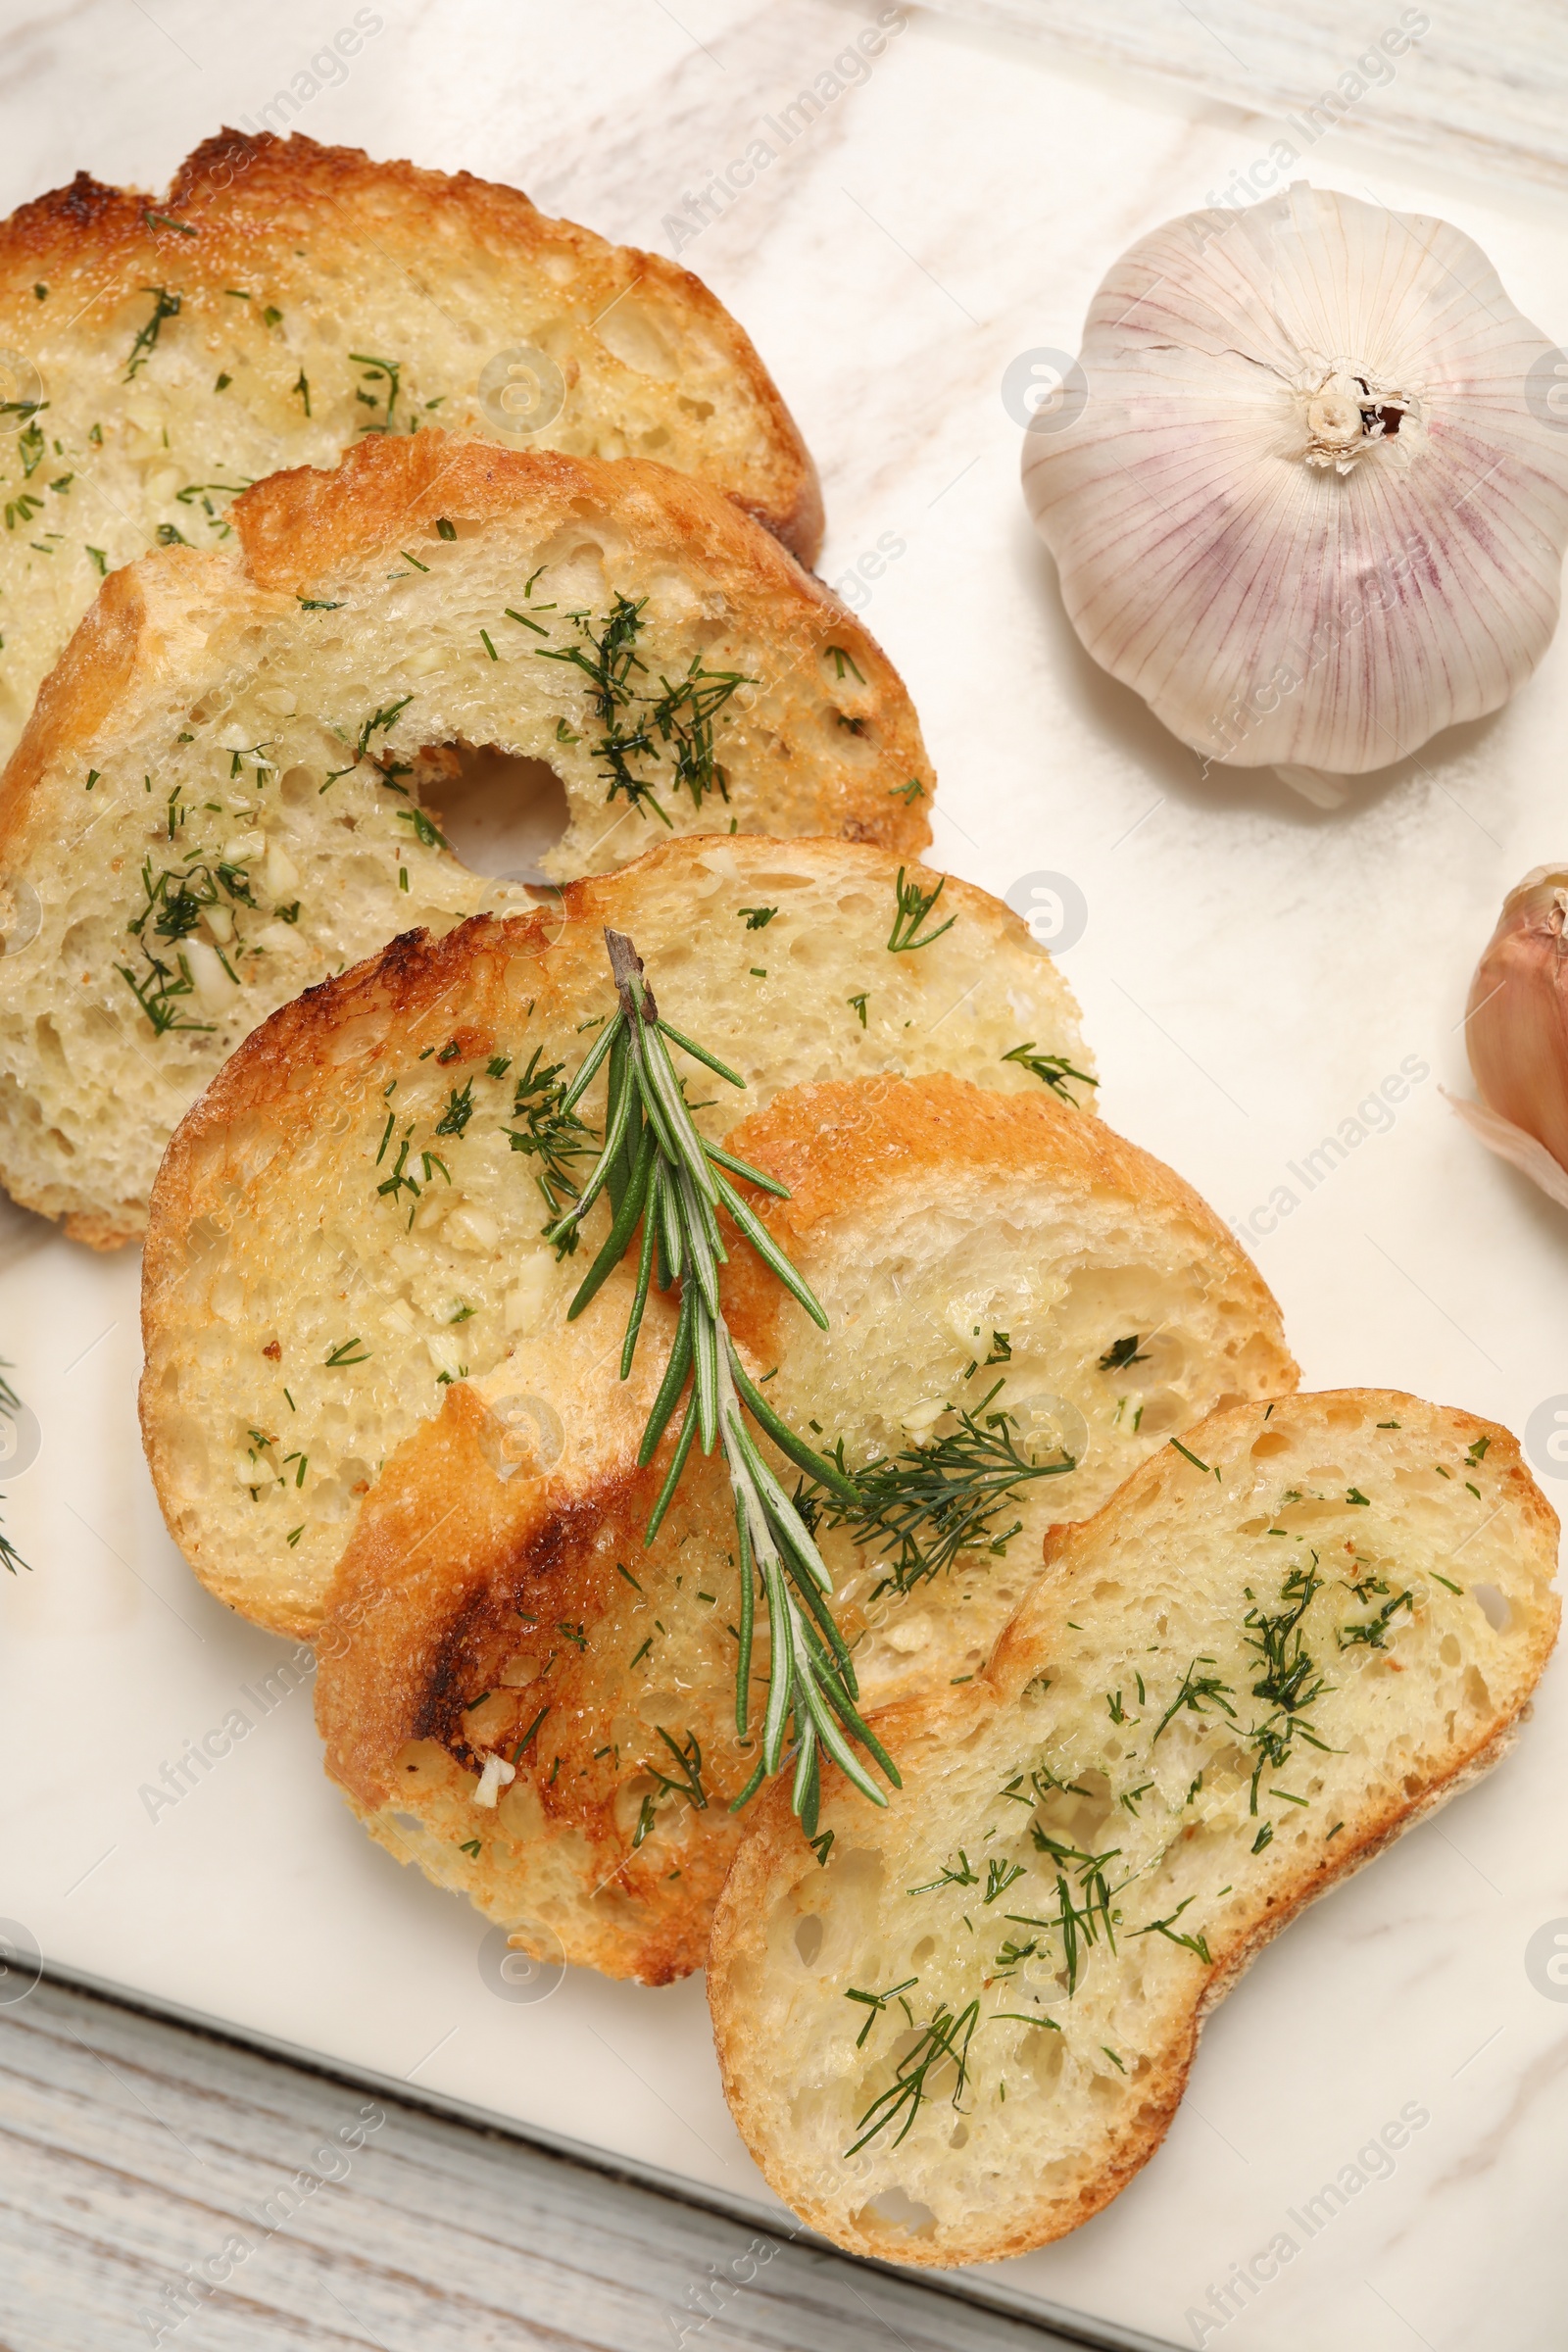 Photo of Tasty baguette with garlic, dill and rosemary on white wooden table, top view